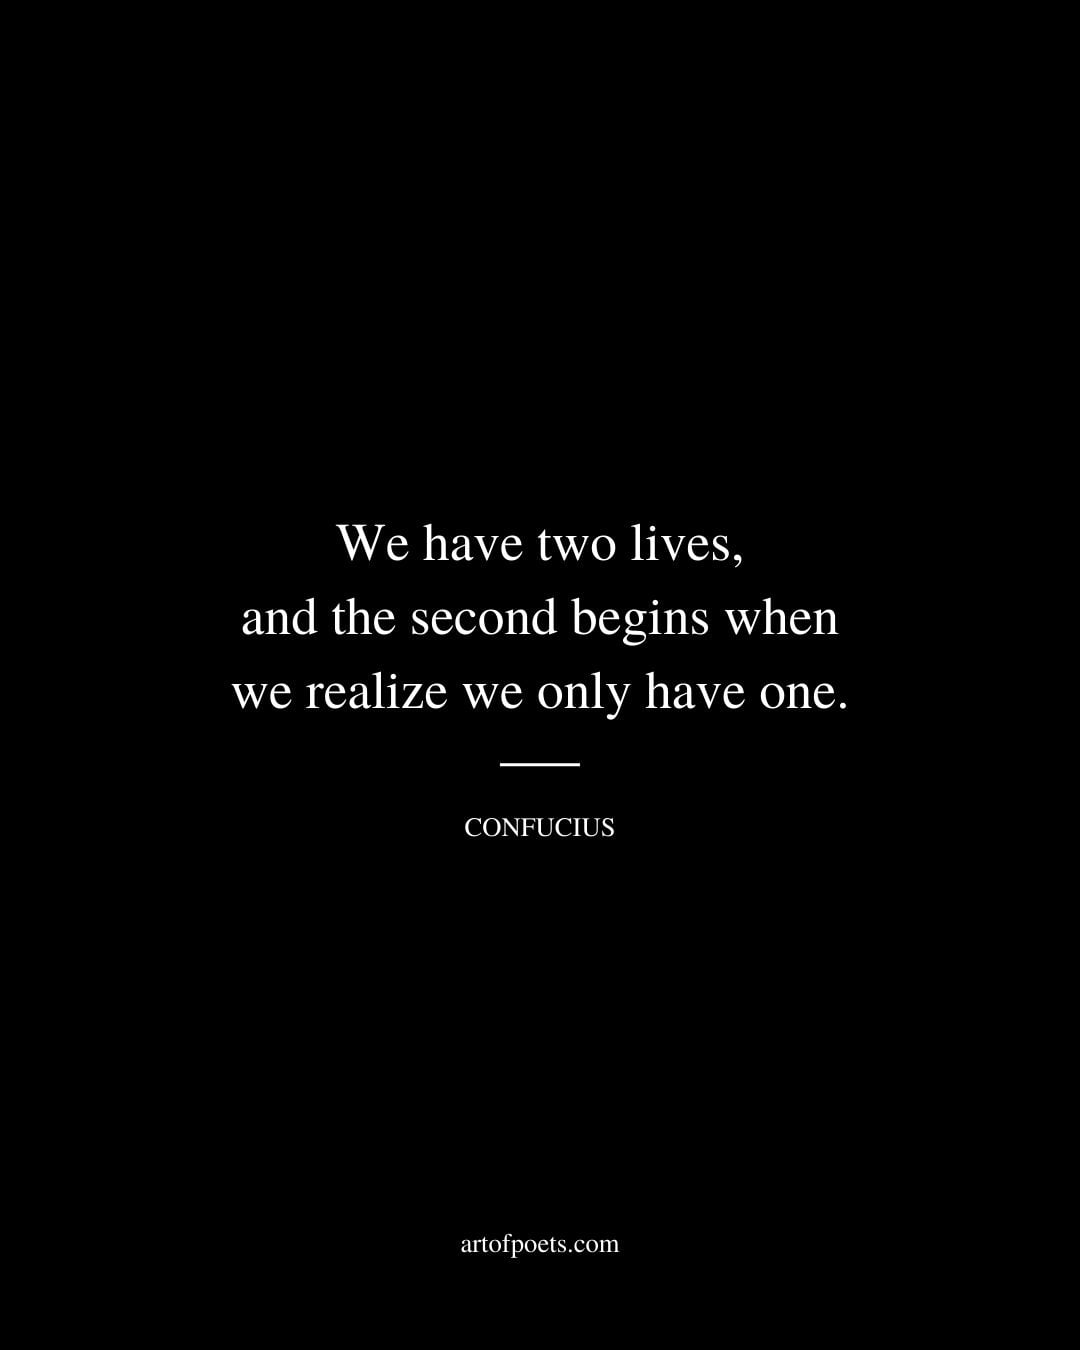 We have two lives and the second begins when we realize we only have one